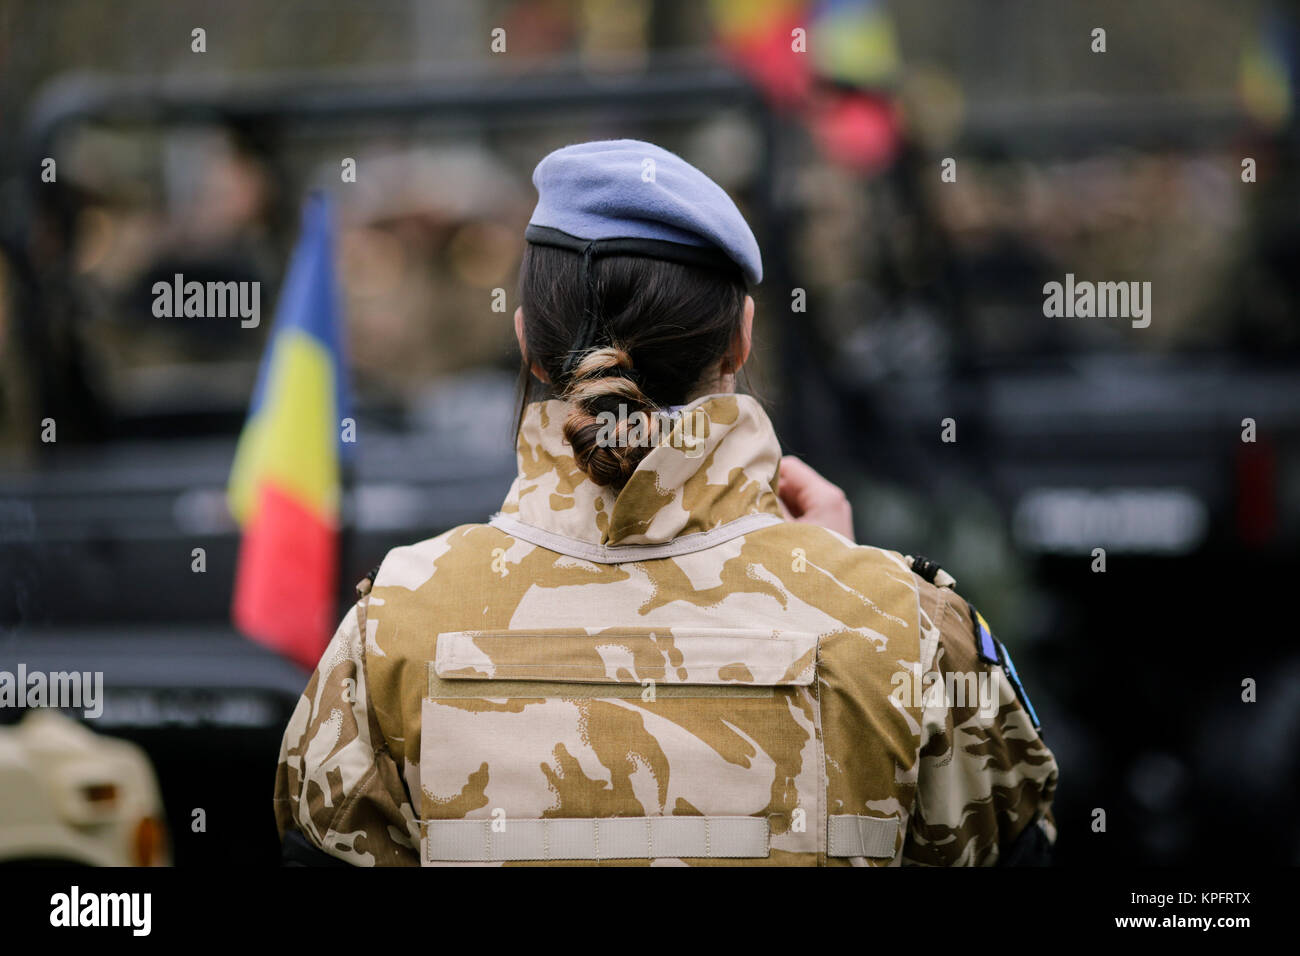 Female soldier takes part at a military parade Stock Photo